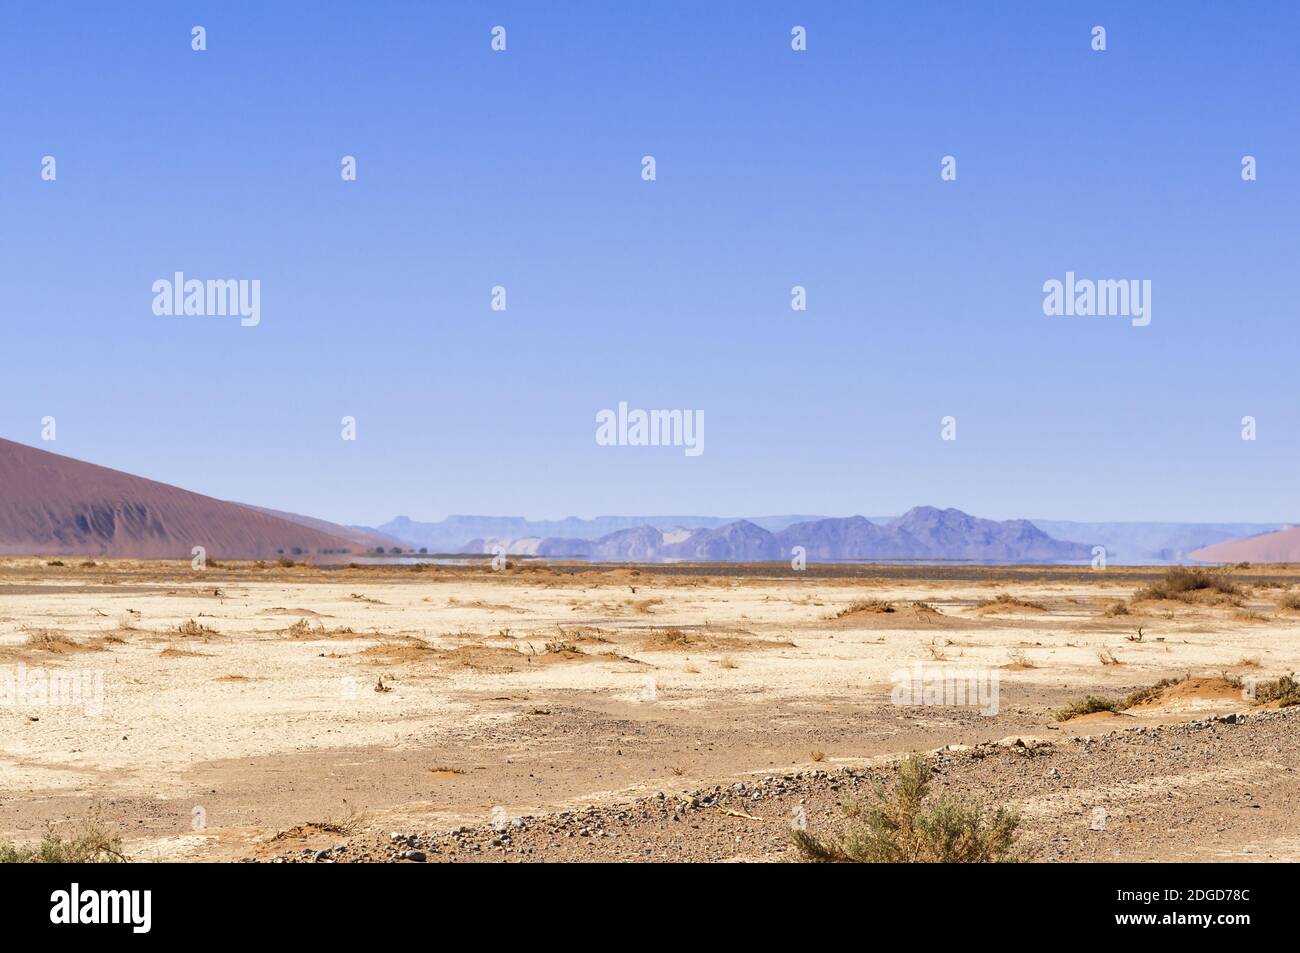 Landscape in the Namib desert, the water on the horizon is a mirage Namibia, Africa. Stock Photo